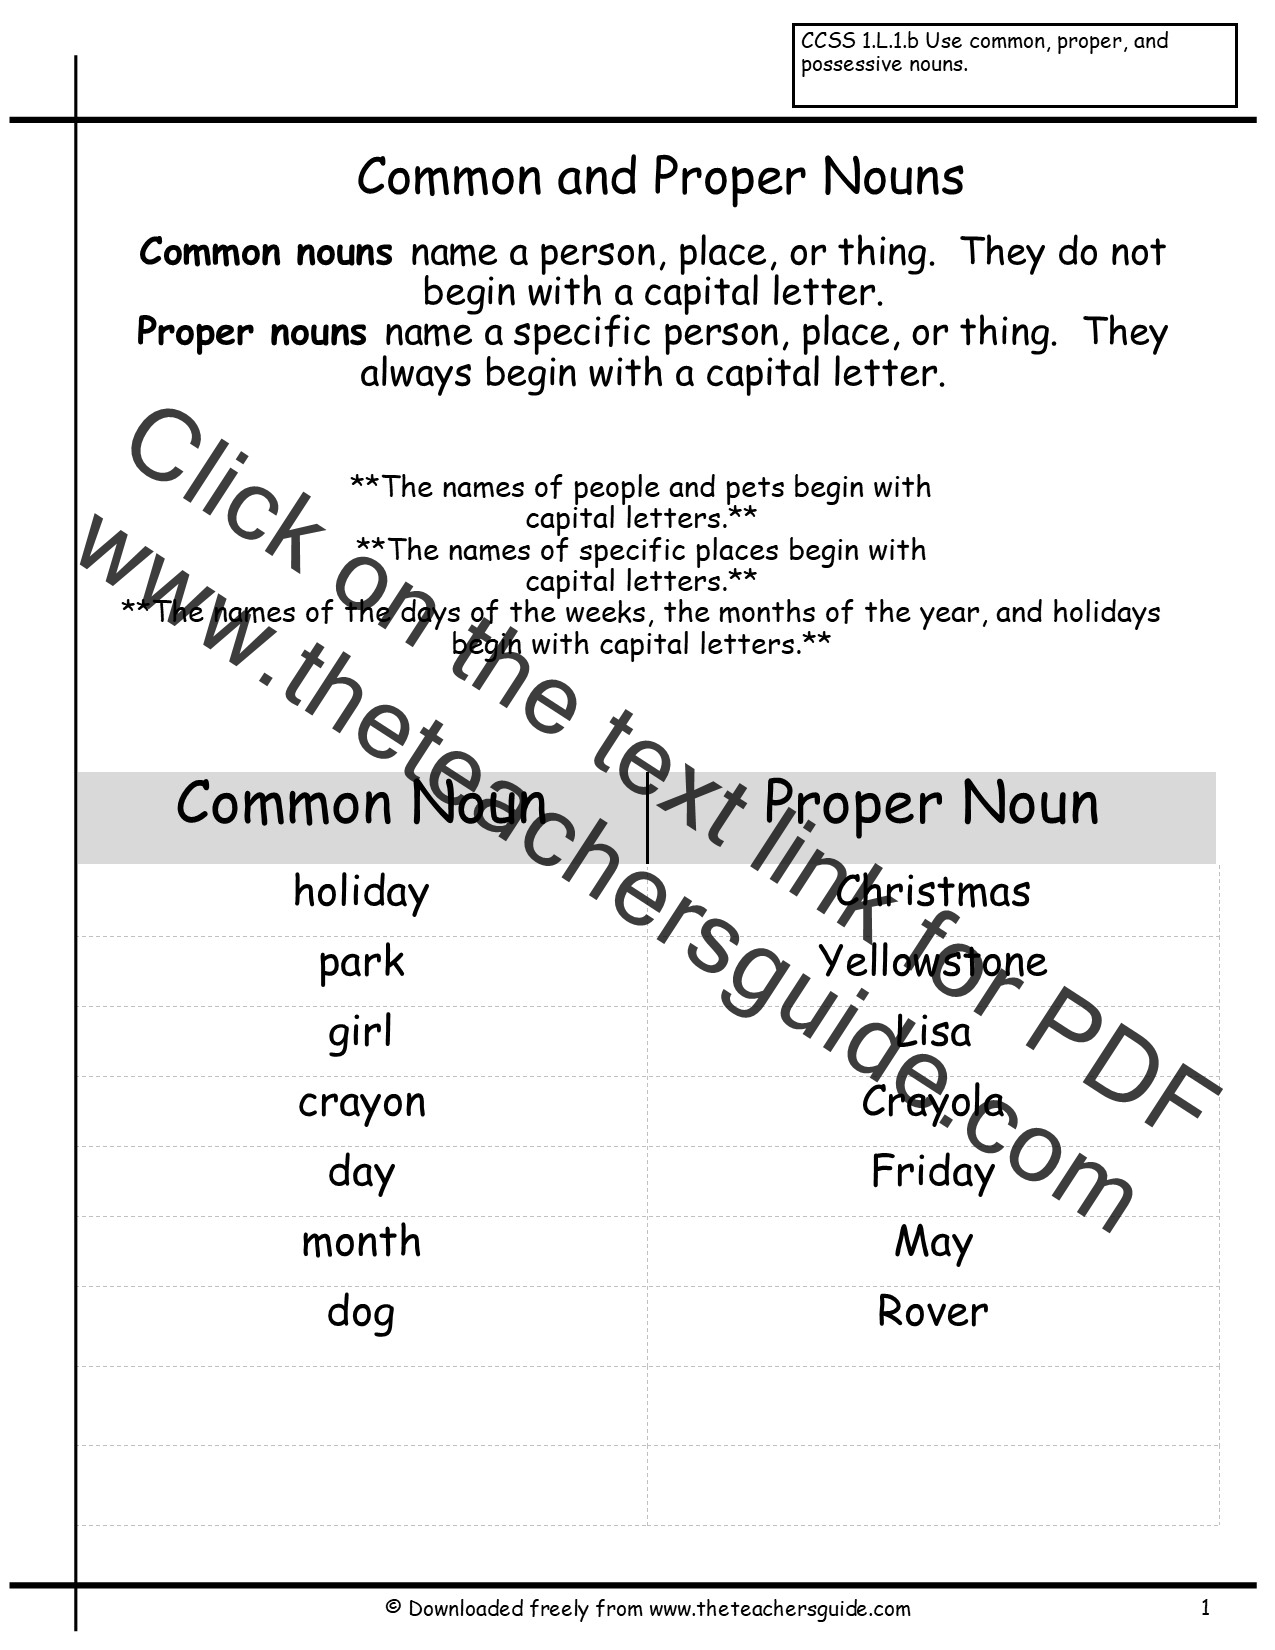 nouns-worksheets-from-the-teacher-s-guide